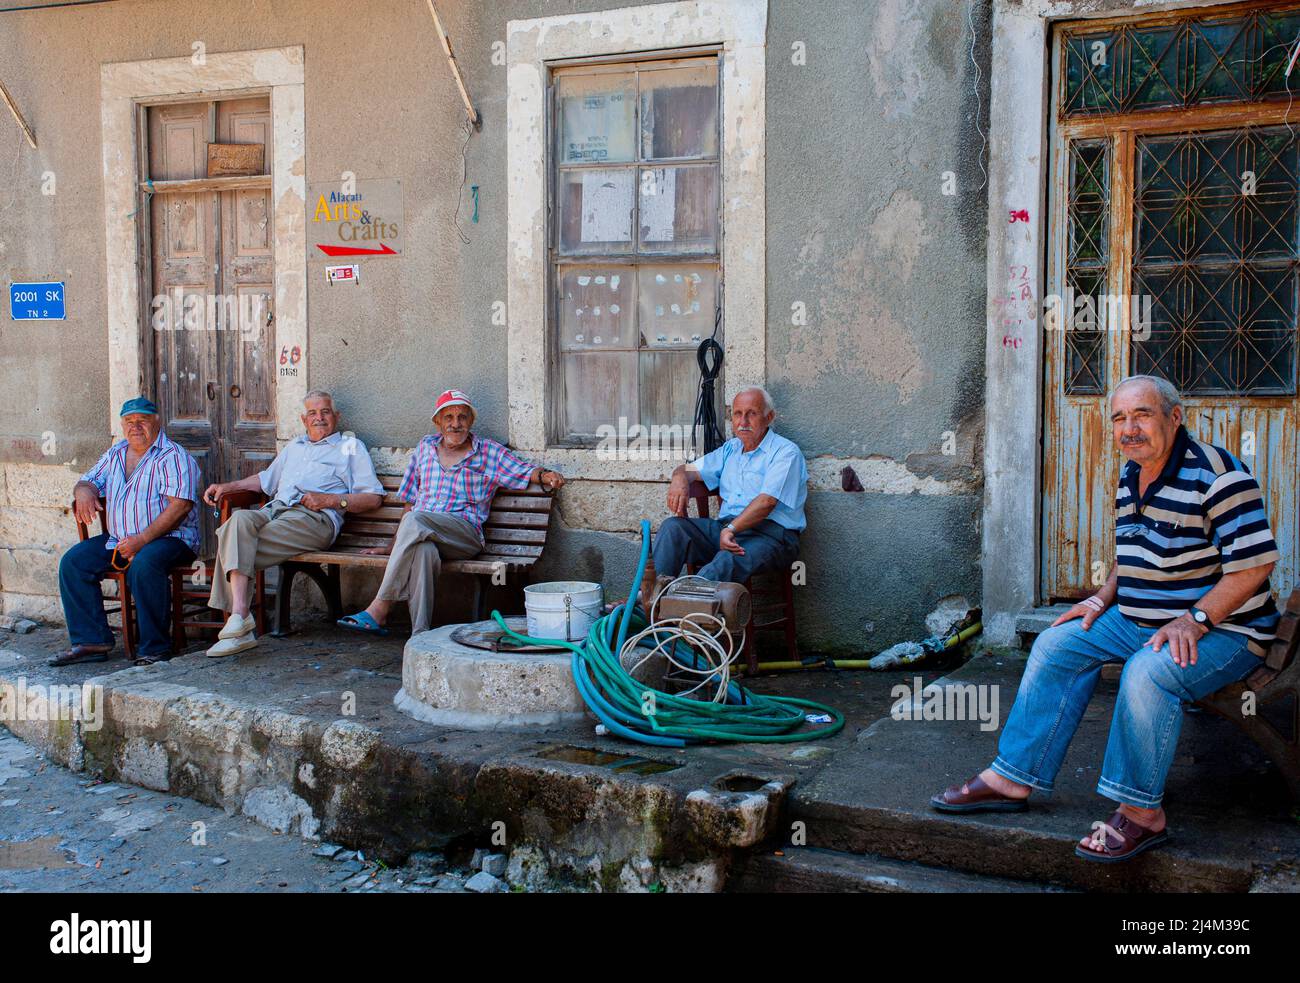 Turkish men sit together having a morning chat and conversation about life and the new day in Alaçatı, Turkey. Stock Photo